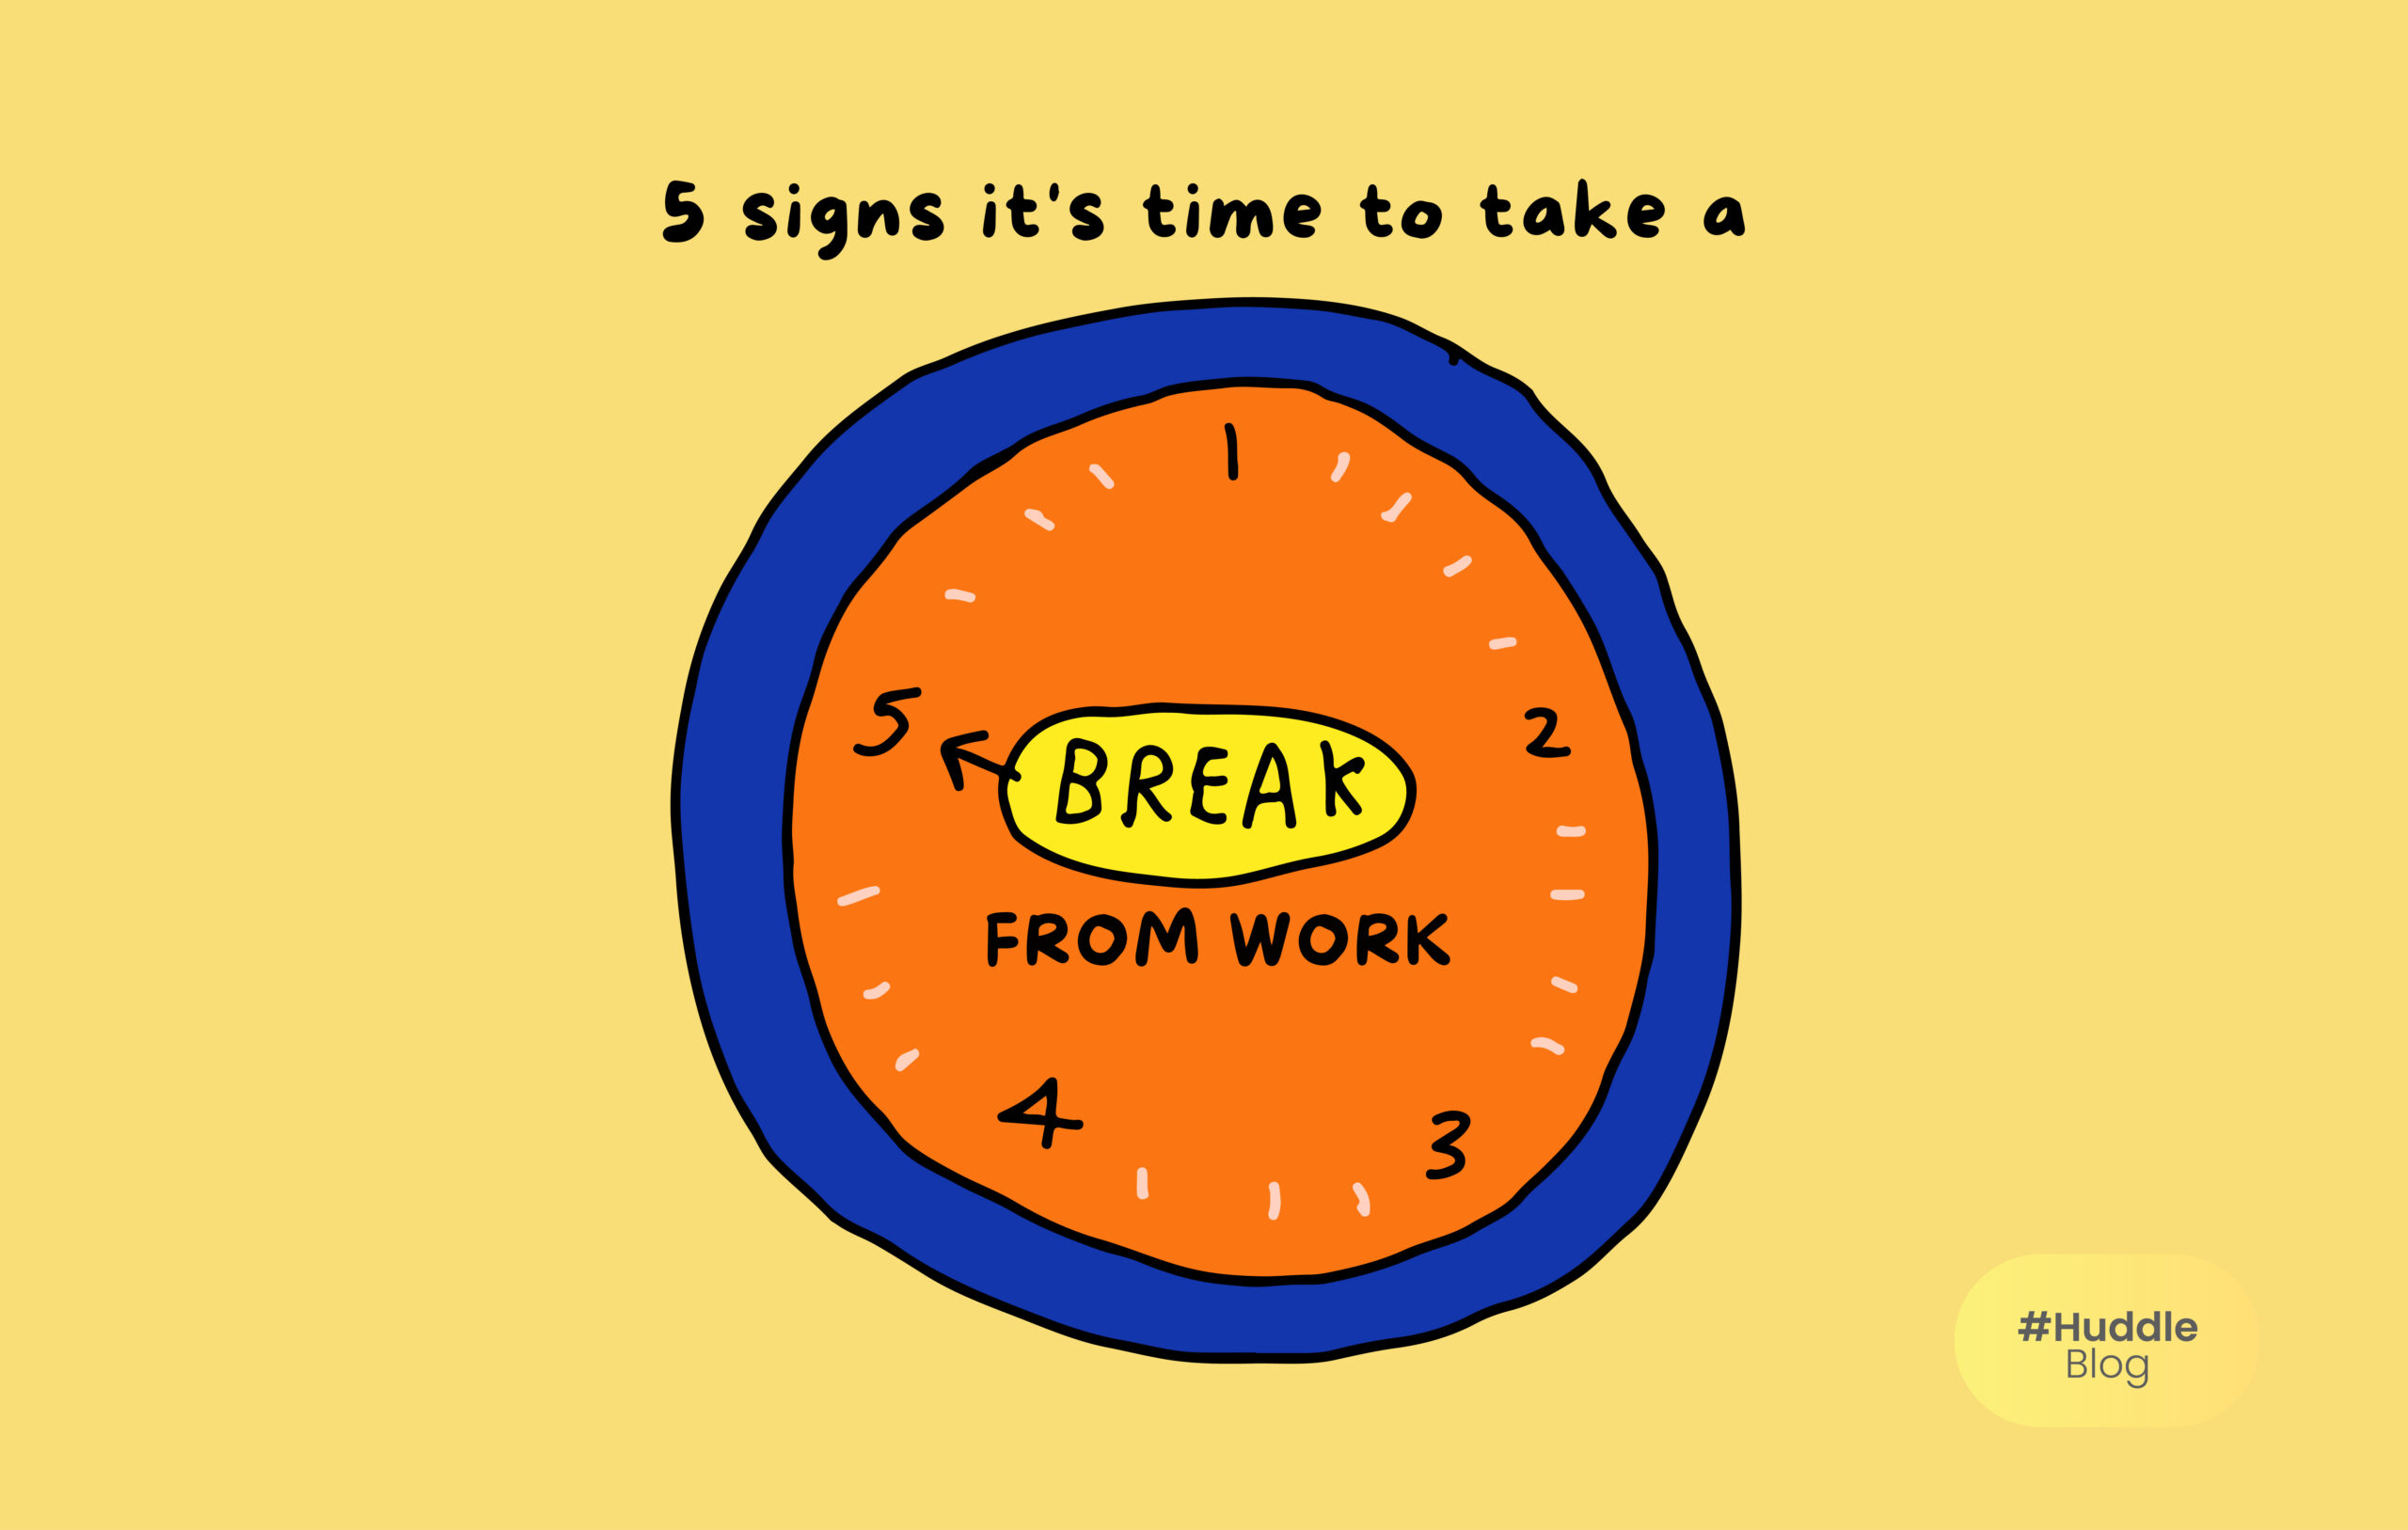 5 signs it’s time to take a break from work  😴